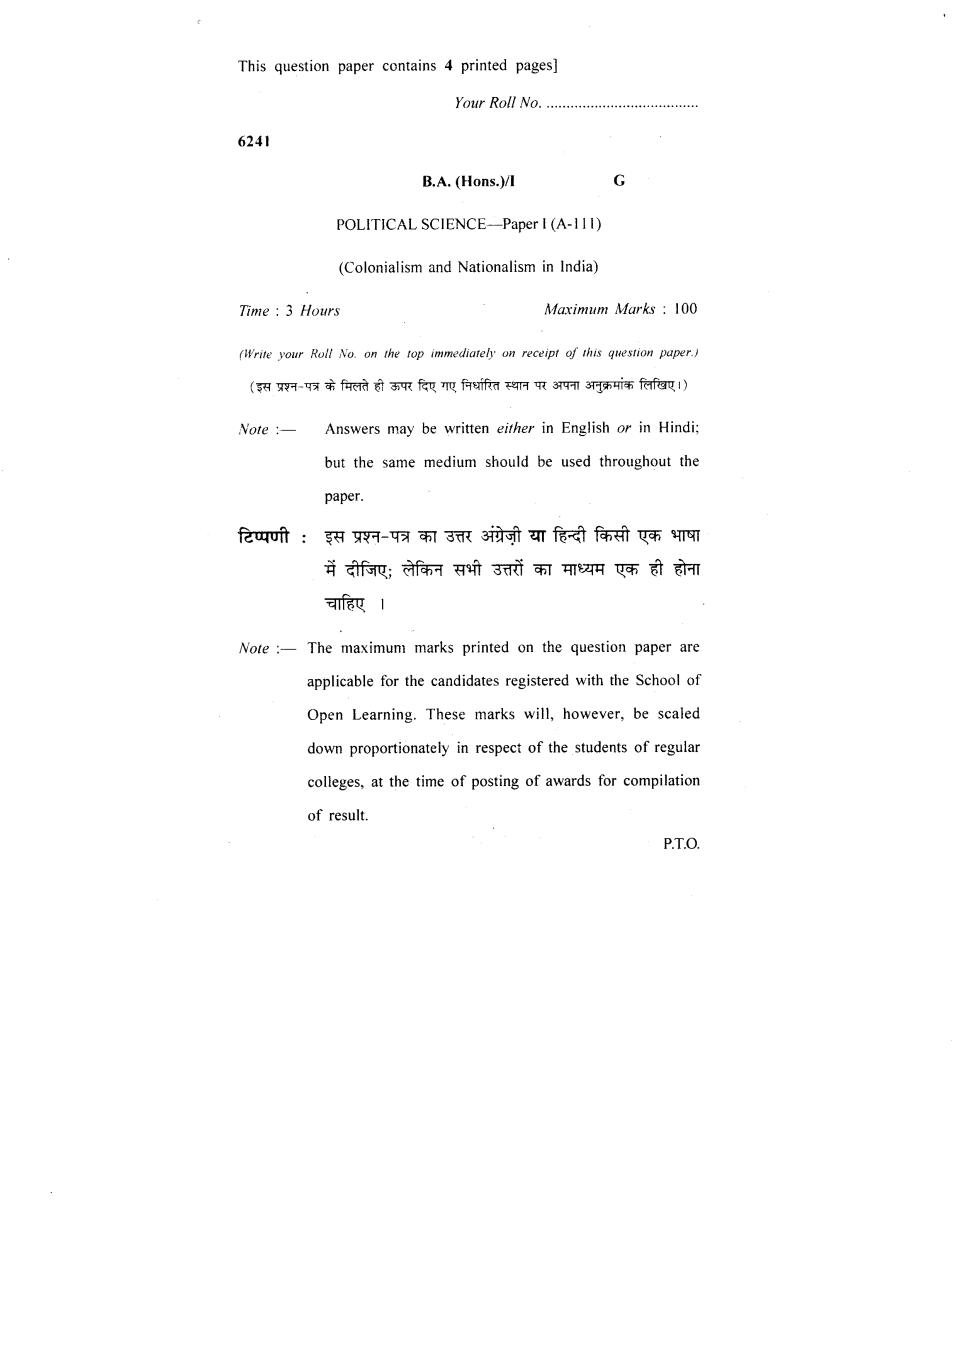 DU SOL Question Paper 2018 BA (Hons.) Political Science - Colonialism and Nationalism in India - Page 1